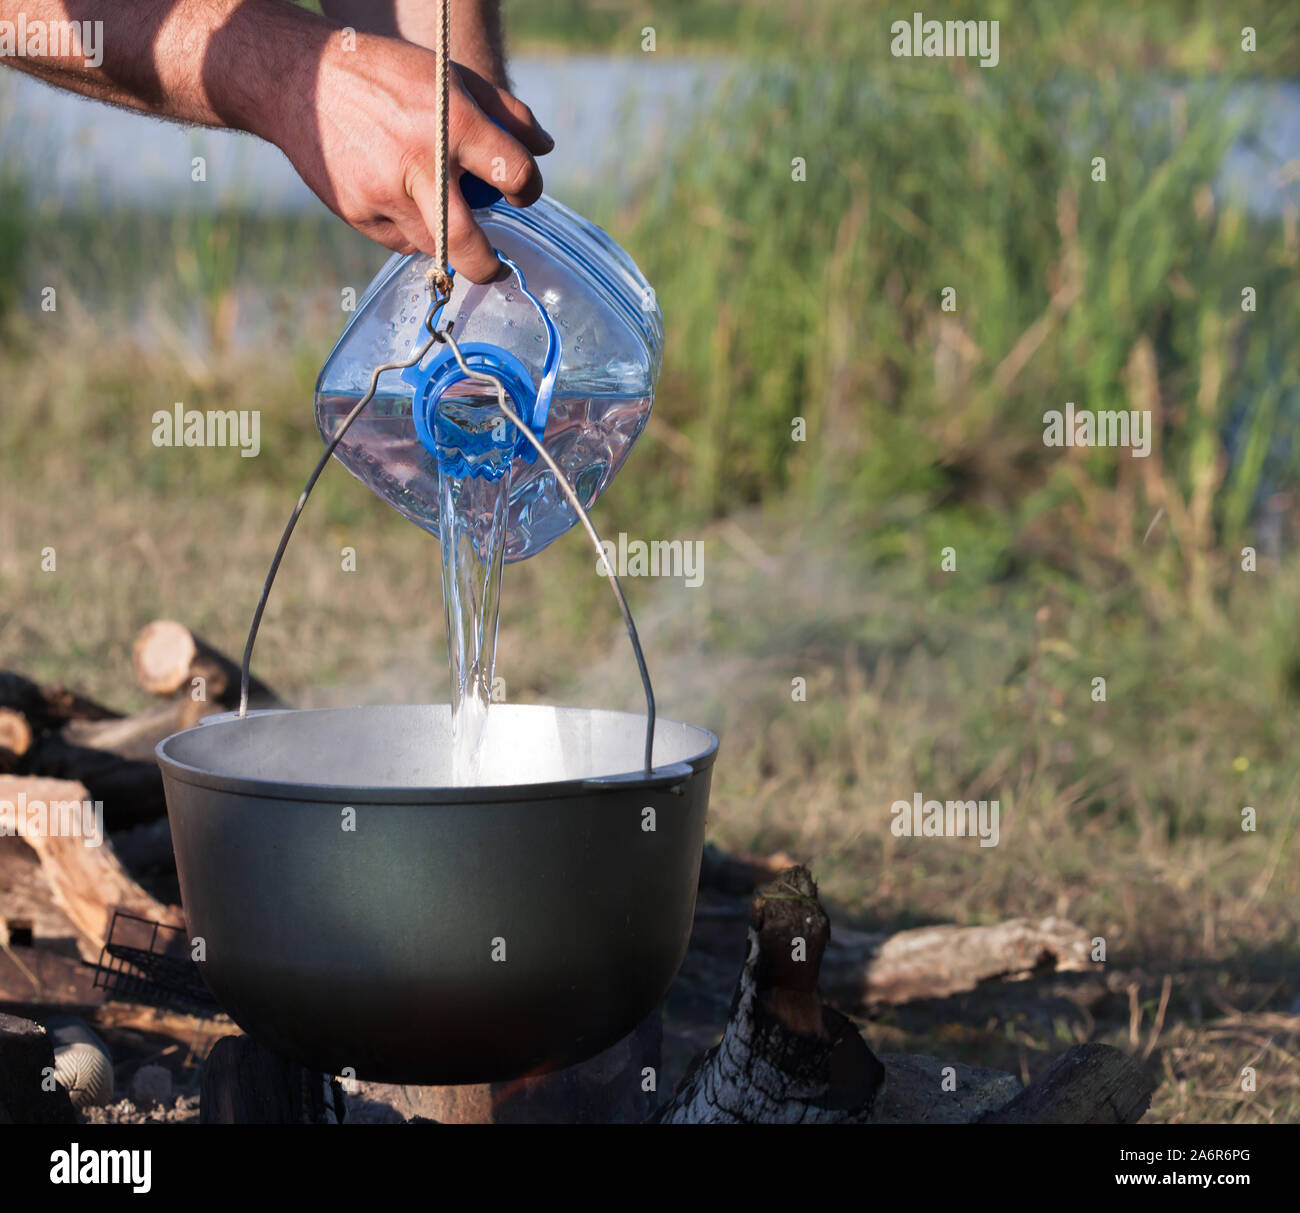 https://c8.alamy.com/comp/2A6R6PG/adding-water-from-big-plastic-bottle-in-black-used-cauldron-on-open-fire-camping-meal-2A6R6PG.jpg